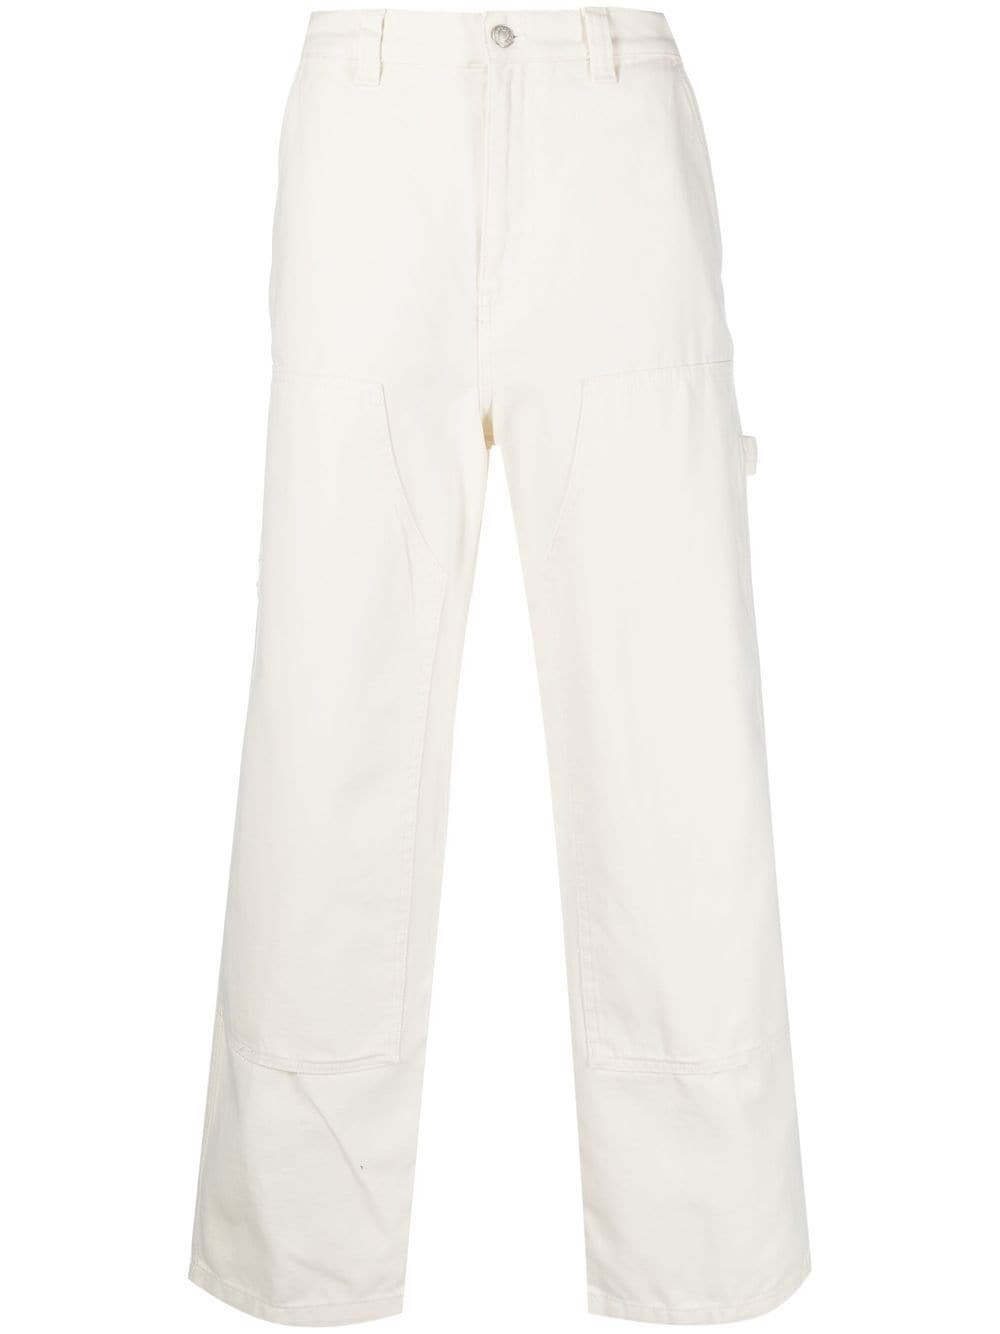 STUSSY - Cotton Trousers Stussy